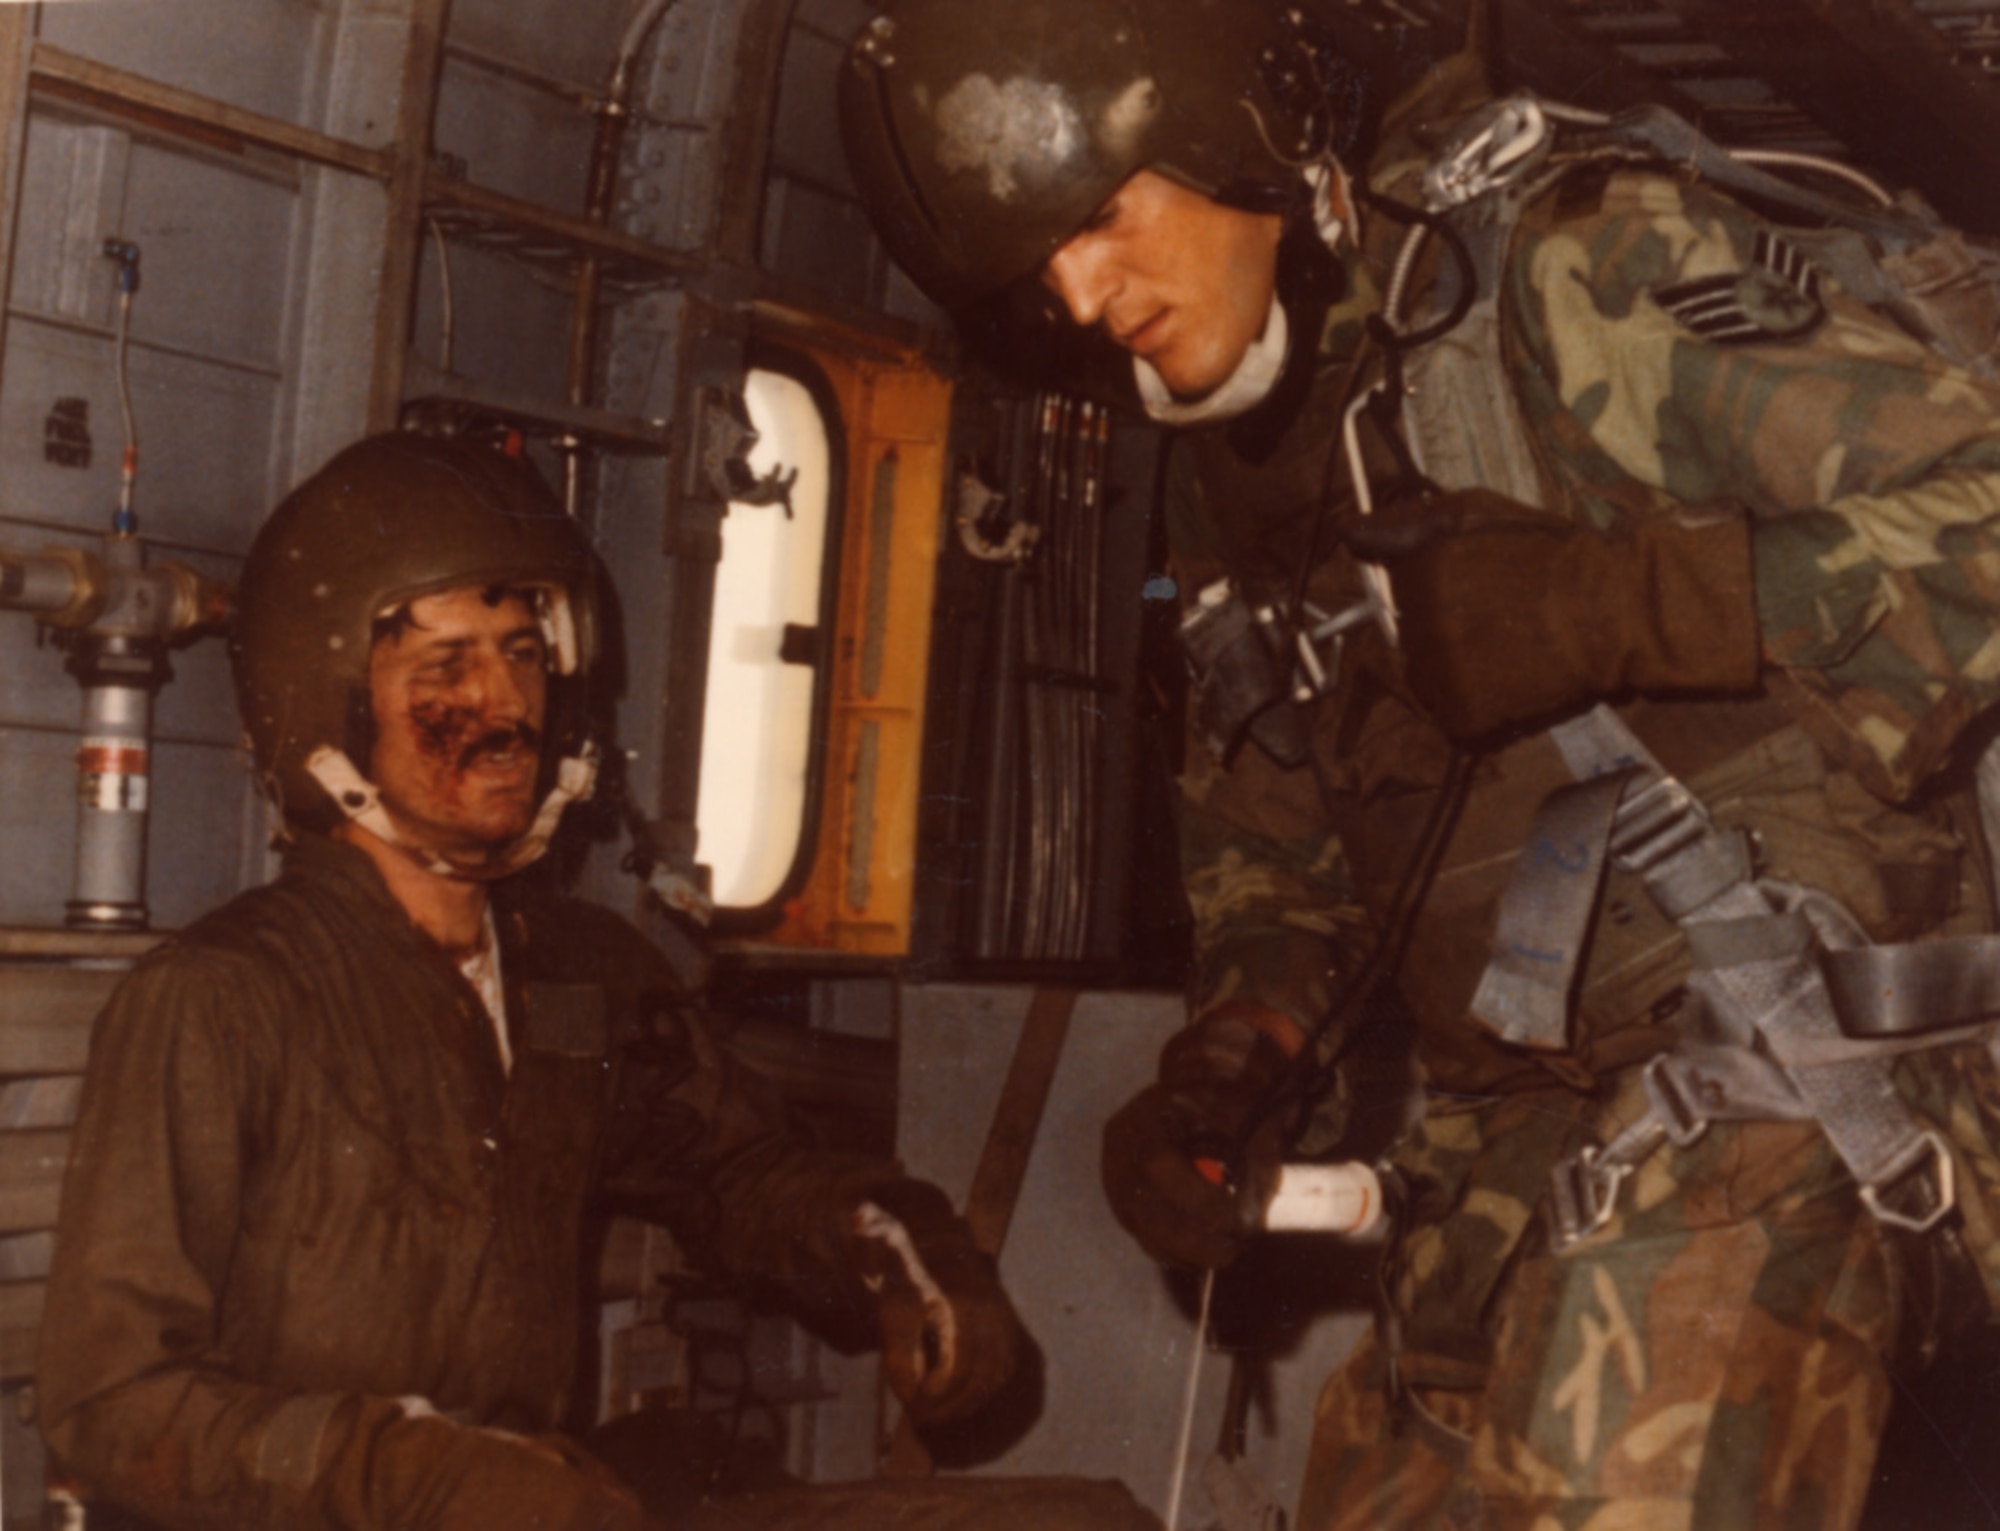 Lieutenant Fleming relaxes aboard the HH-43 helicopter following his rescue as a 40th ARR Squadron PJ reels in the rescue hoist on April 28, 1971.